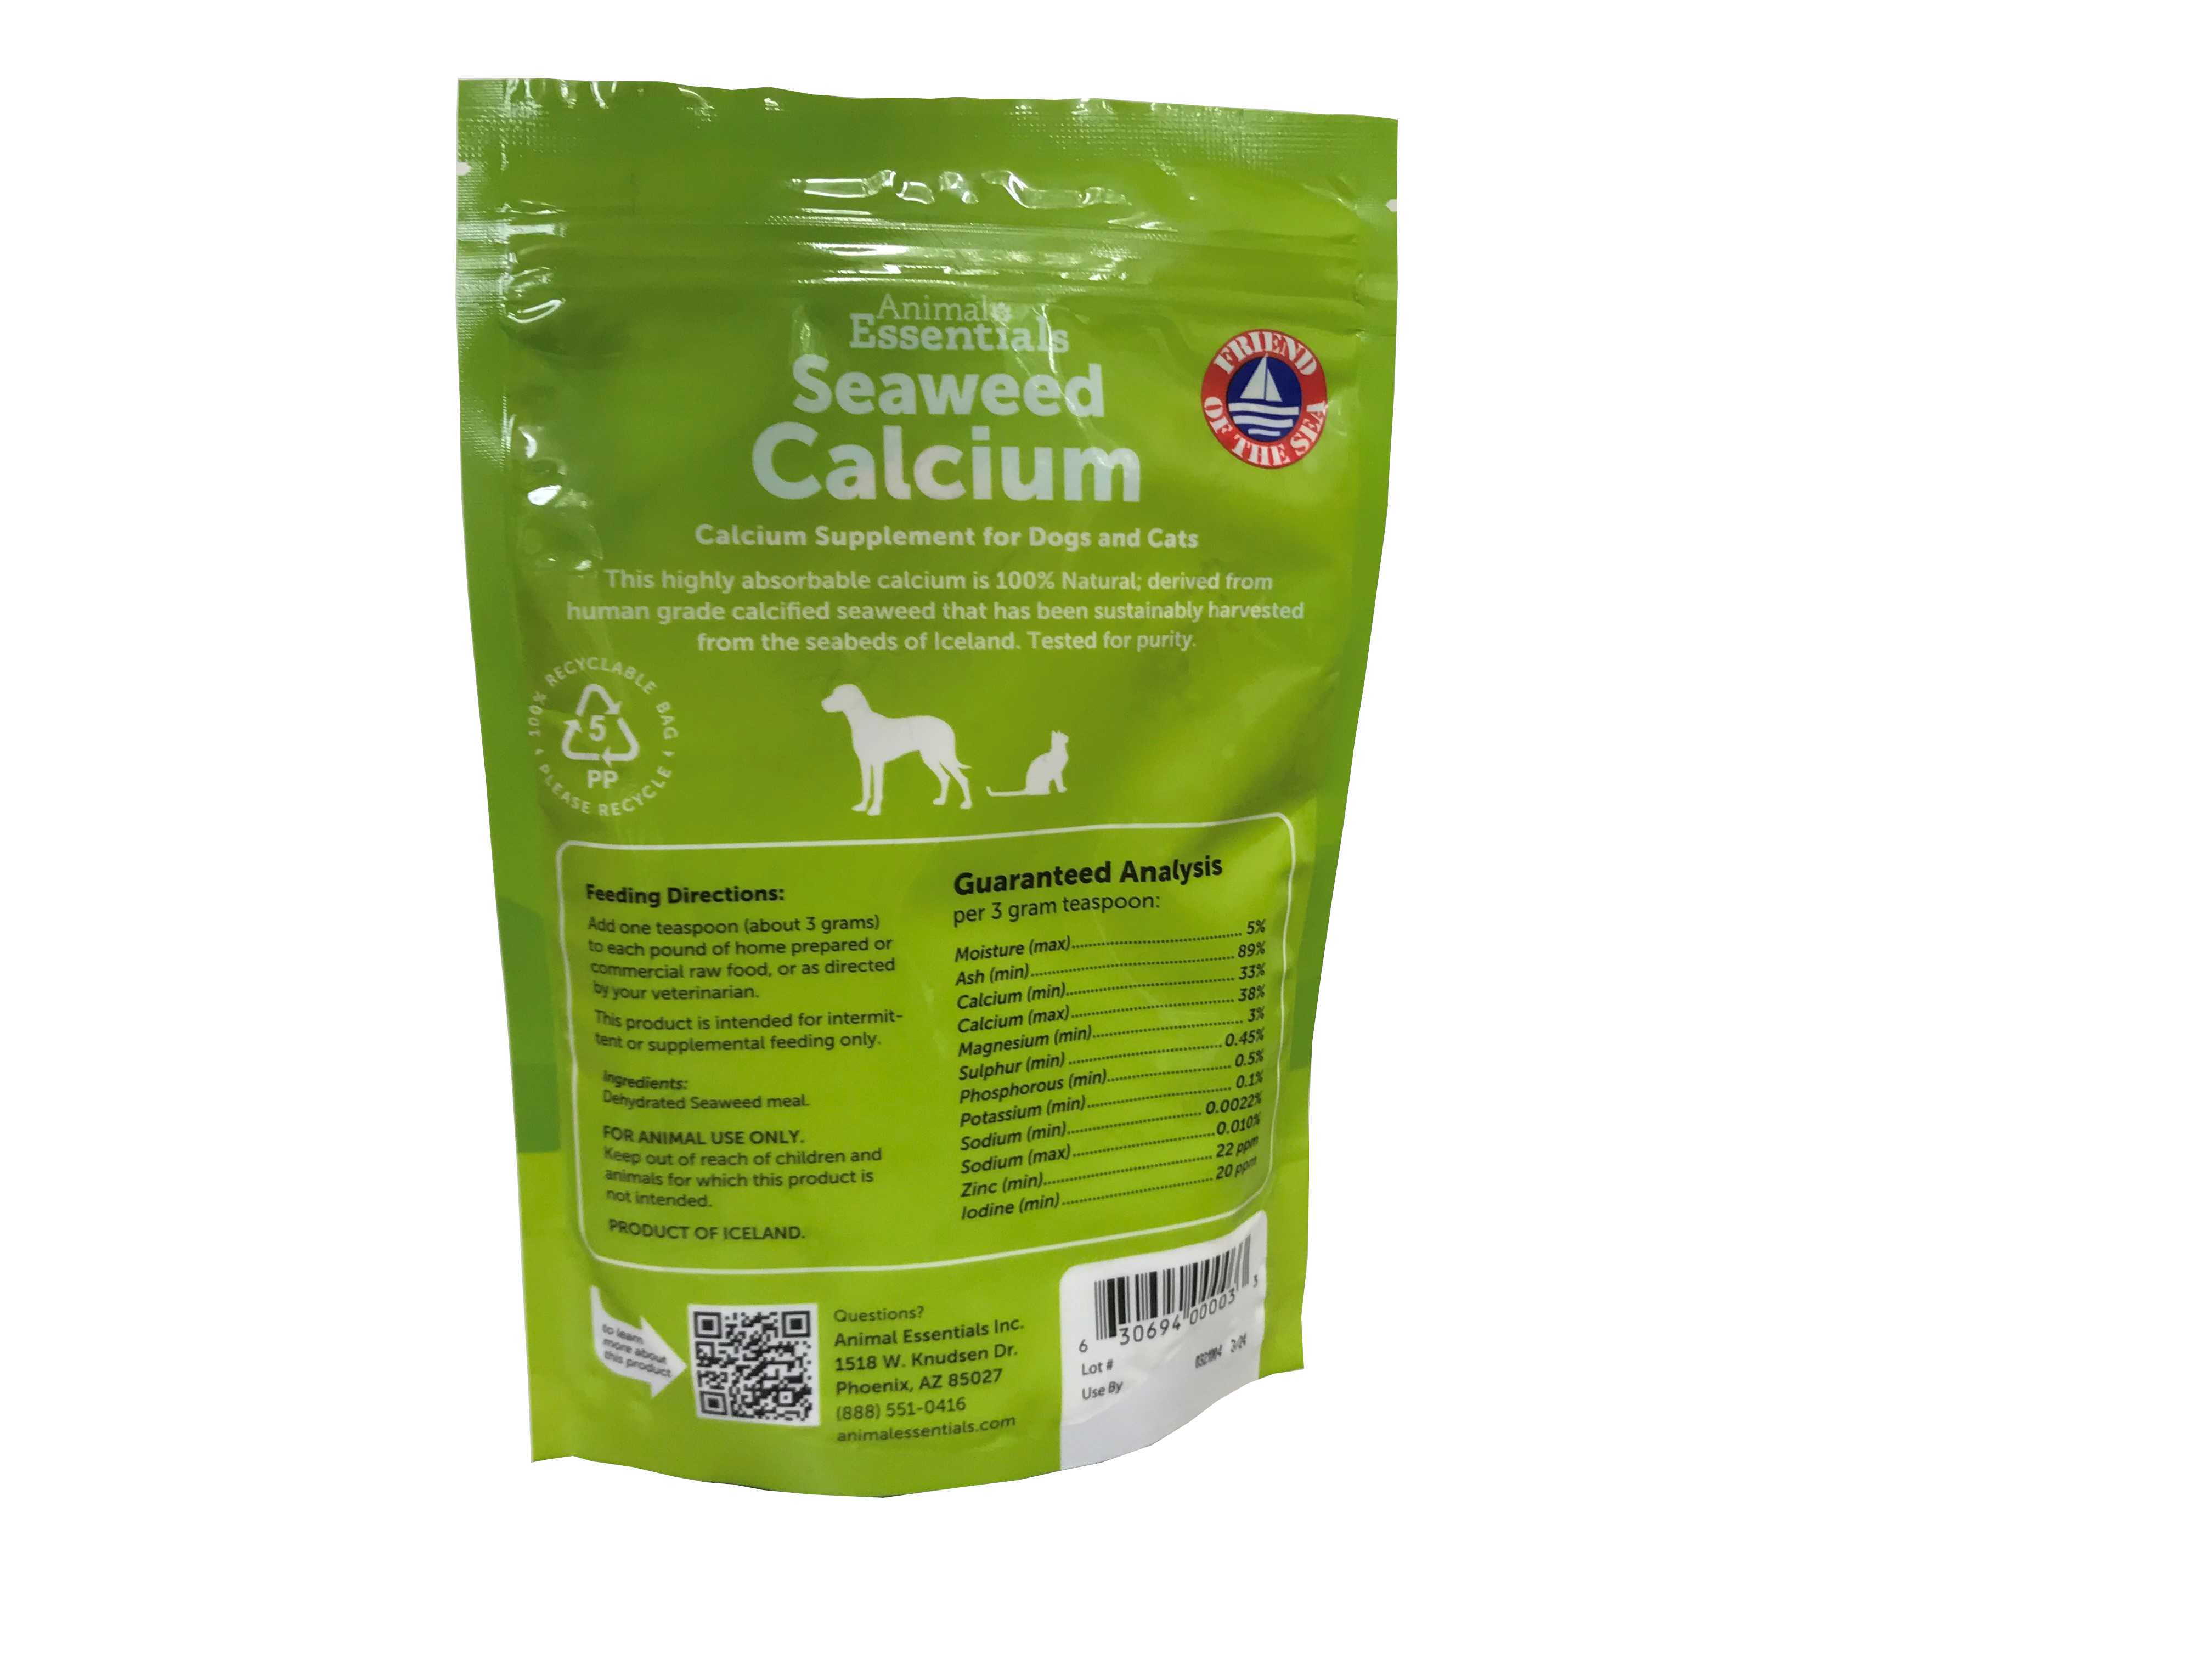 Seaweed Calcium for dogs and cats - Guaranteed Analysis